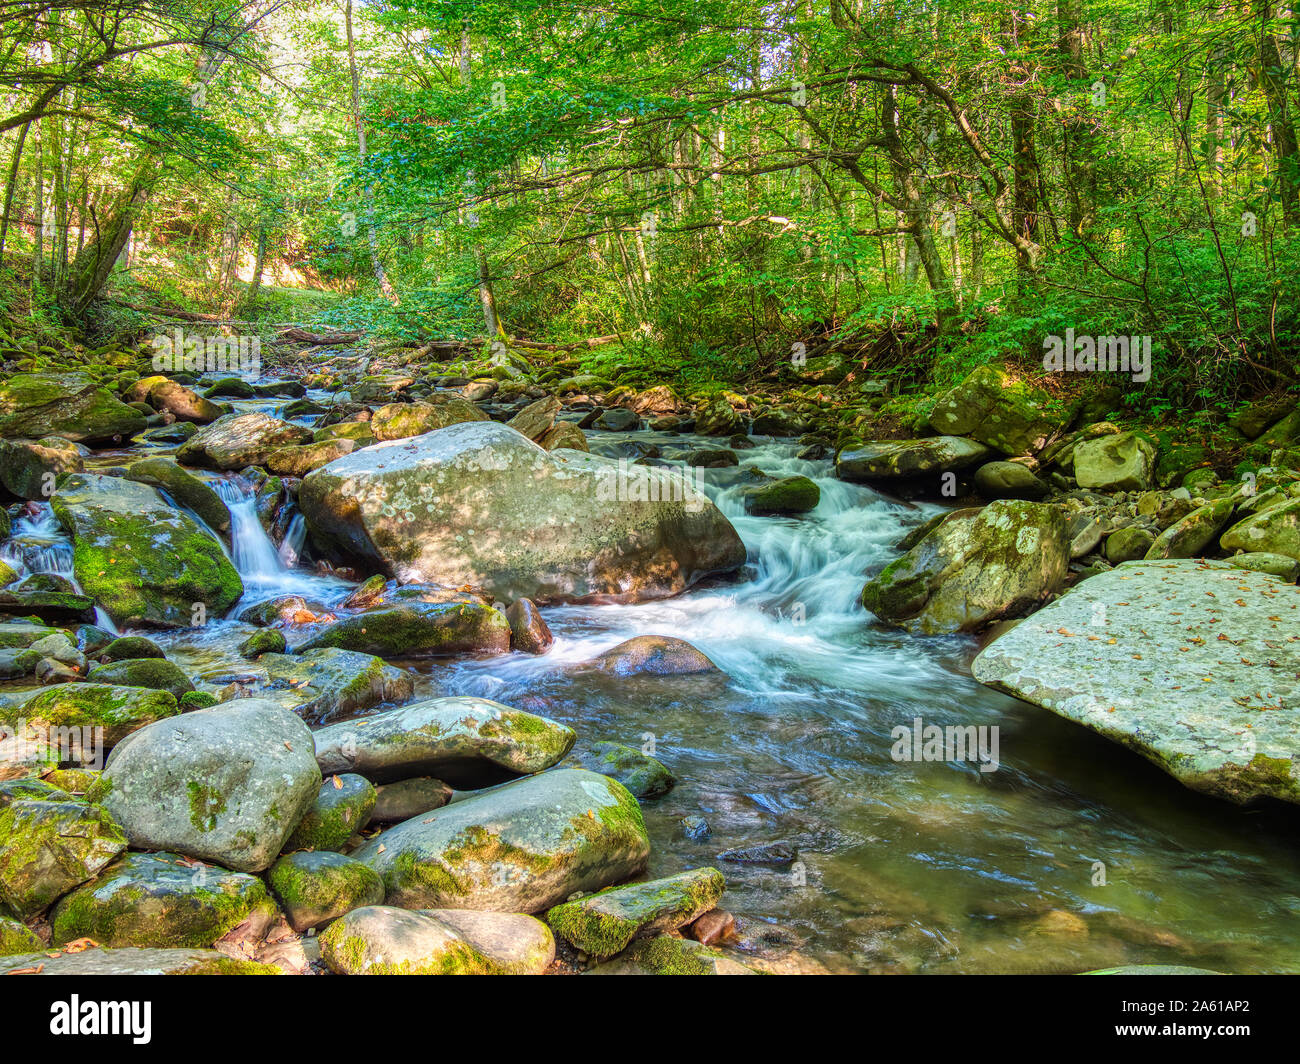 Middle Prong of the Little Pigeon River in the Greenbrier area of  Great Smoky Mountains National Park in Tennessee in the United States Stock Photo